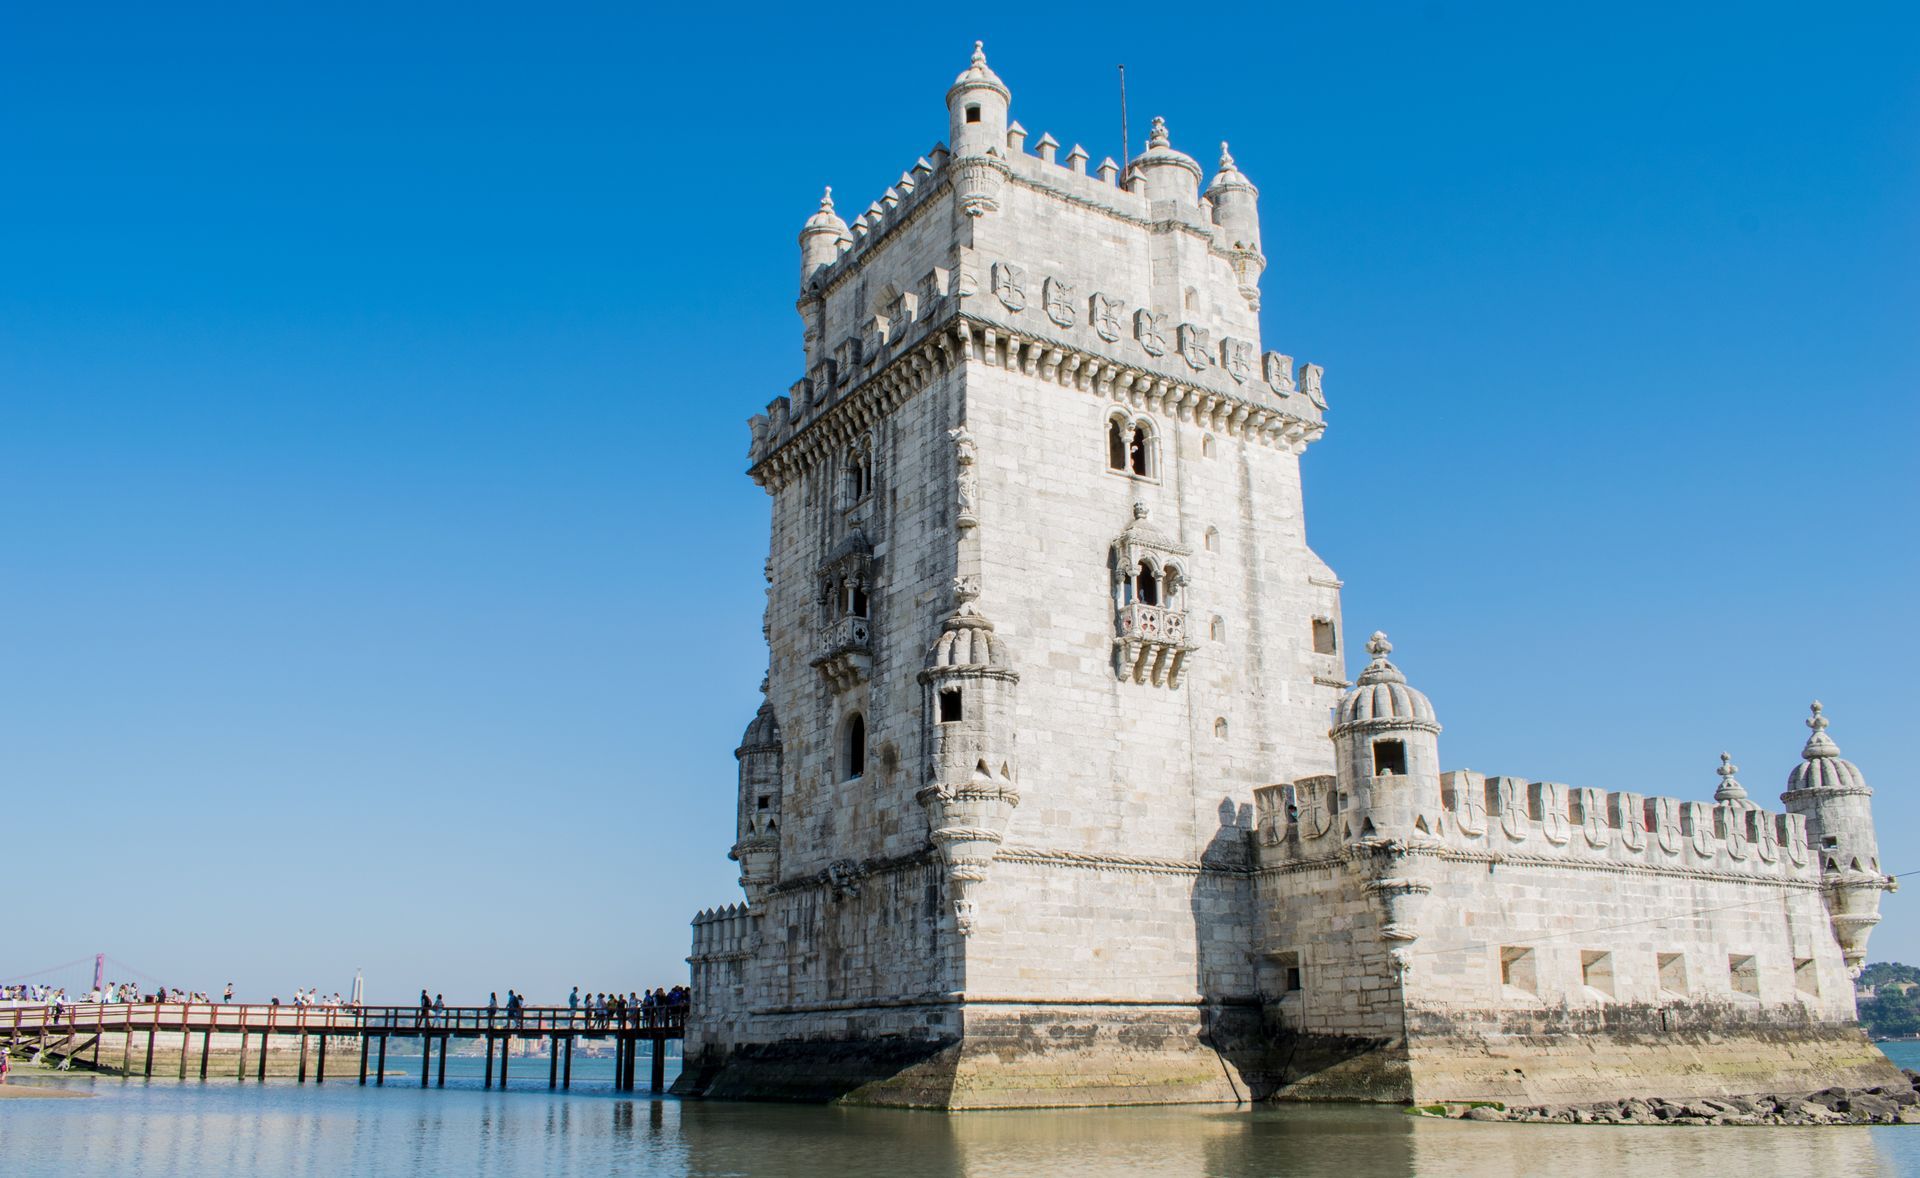 Alojamento Local Portugal Unveiled: Navigating AL - a large white castle is sitting on top of a small island in the middle of a body of water .